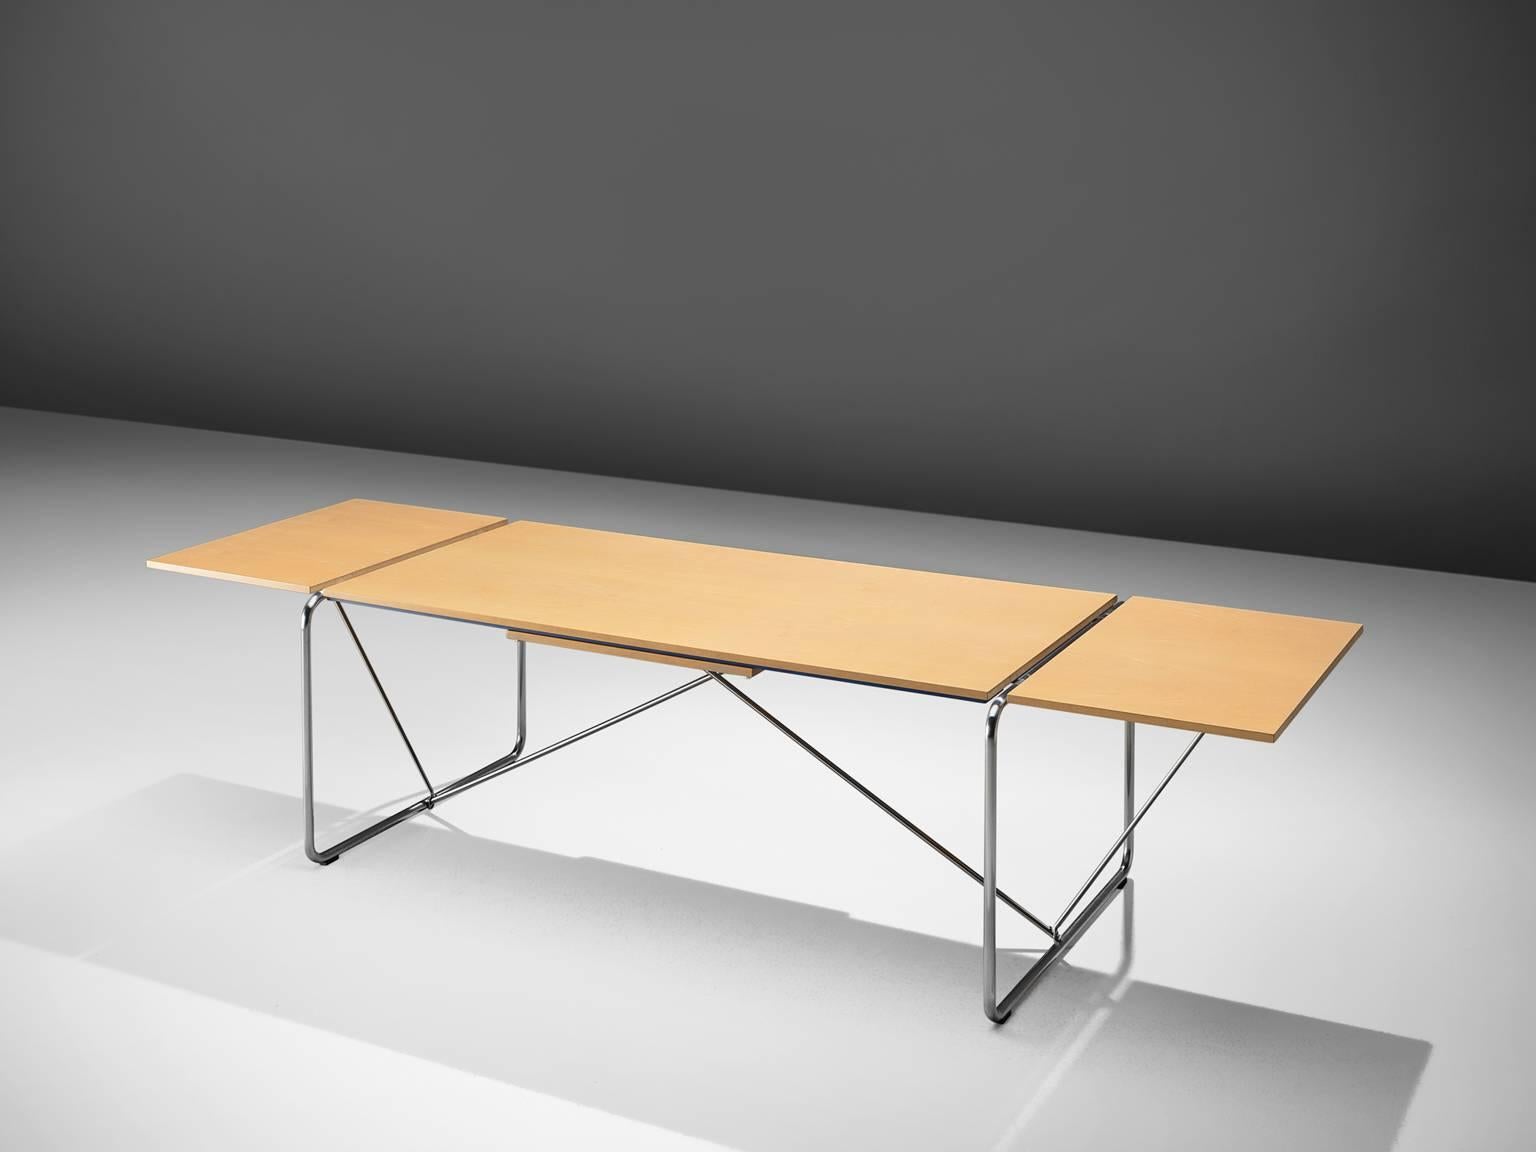 Niels Jørgen for Fritz Hansen, 'Haugesen' table in chrome and maple, Denmark, design 1986, production 1988.

This extendable table is designed by Niels Jørgen for Fritz Hansen. The table is in good condition and is a good example of strict,